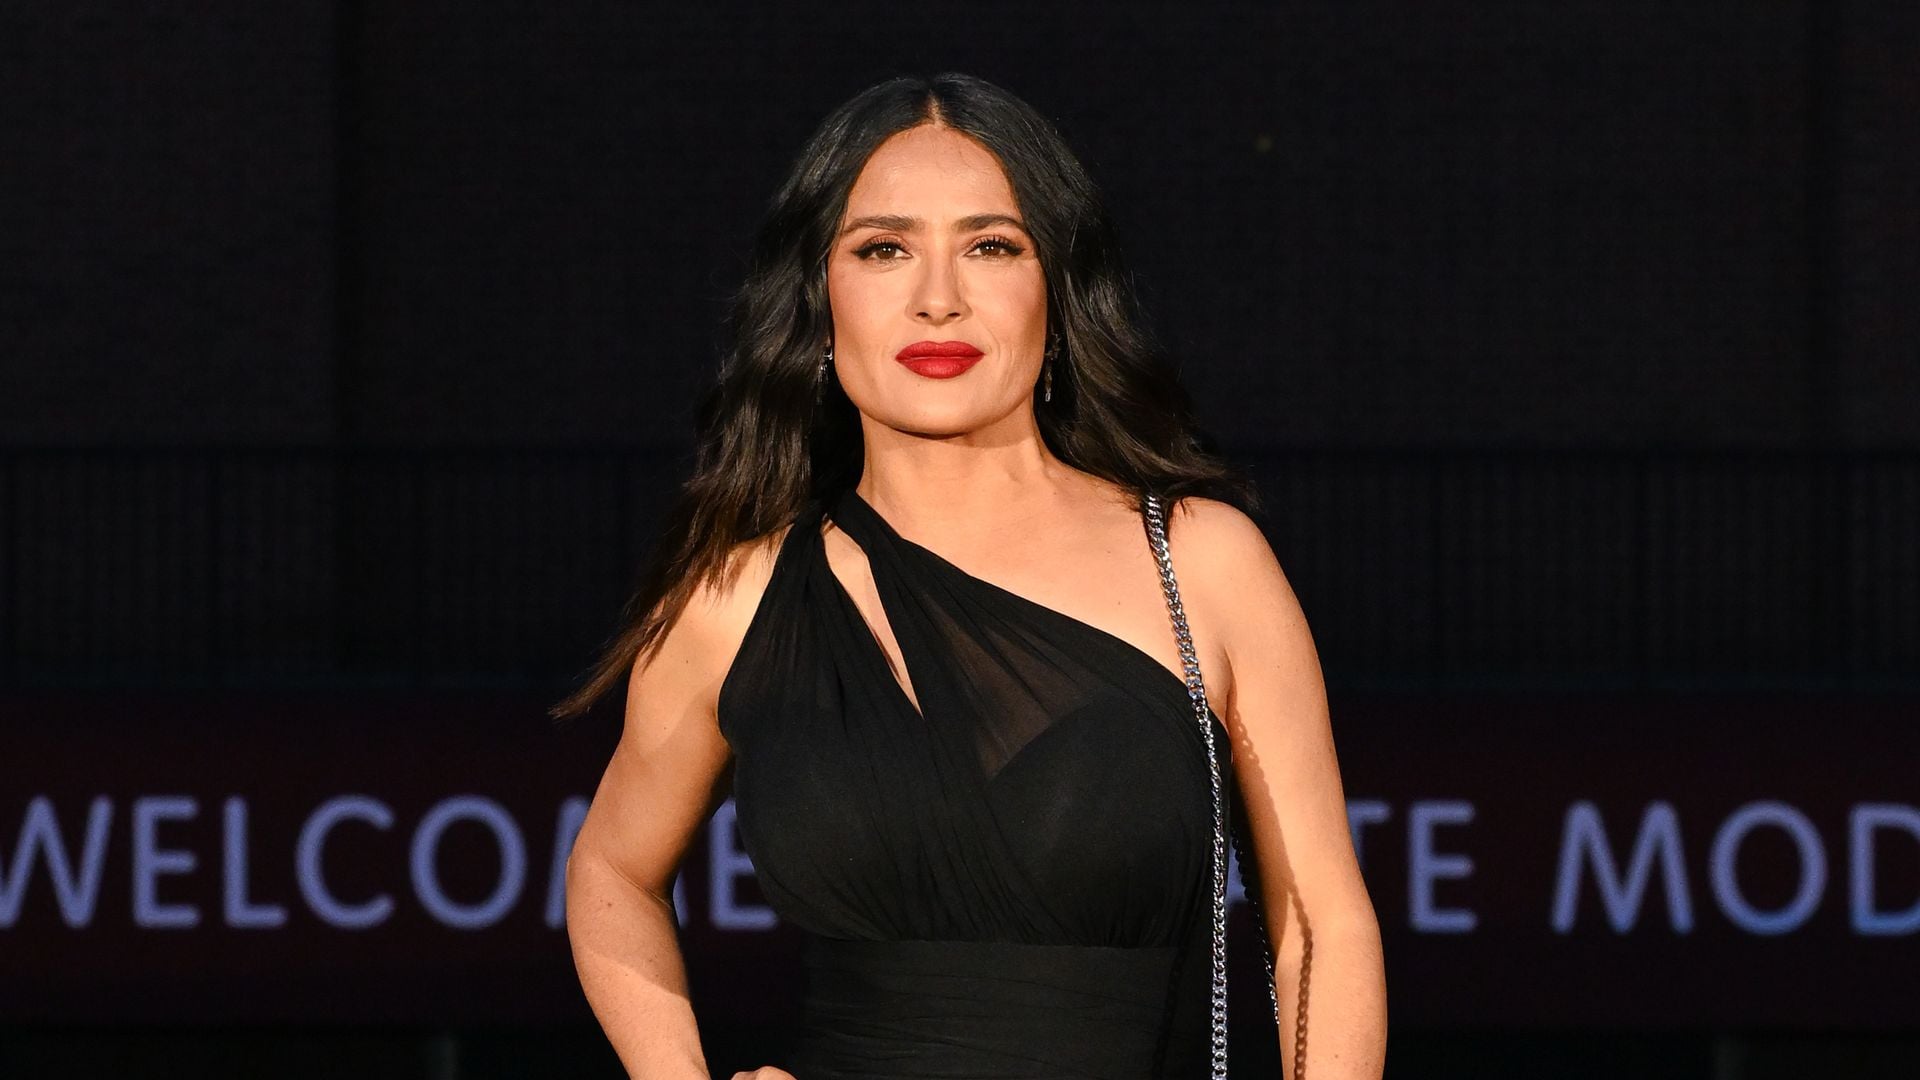 Salma Hayek and Ryan Gosling get ready for Wimbledon with Gucci party